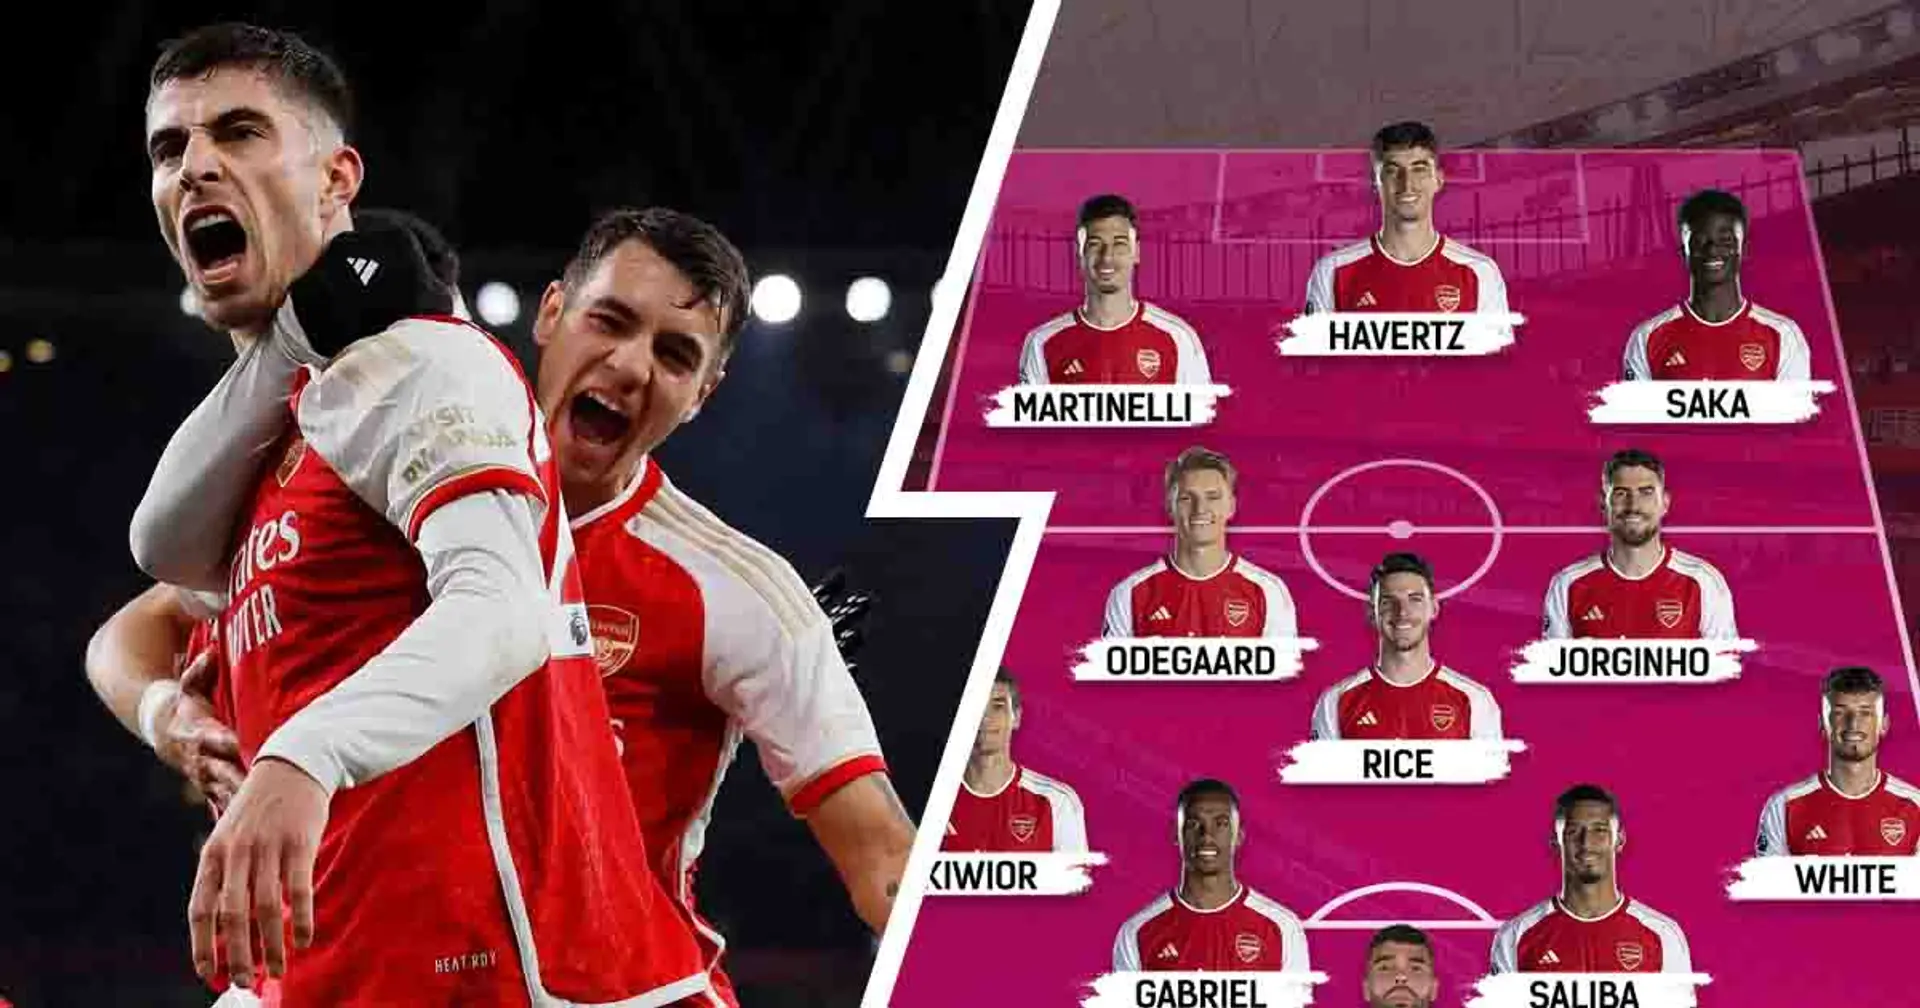 Arsenal's biggest strengths in Newcastle thrashing shown in lineup - four players feature